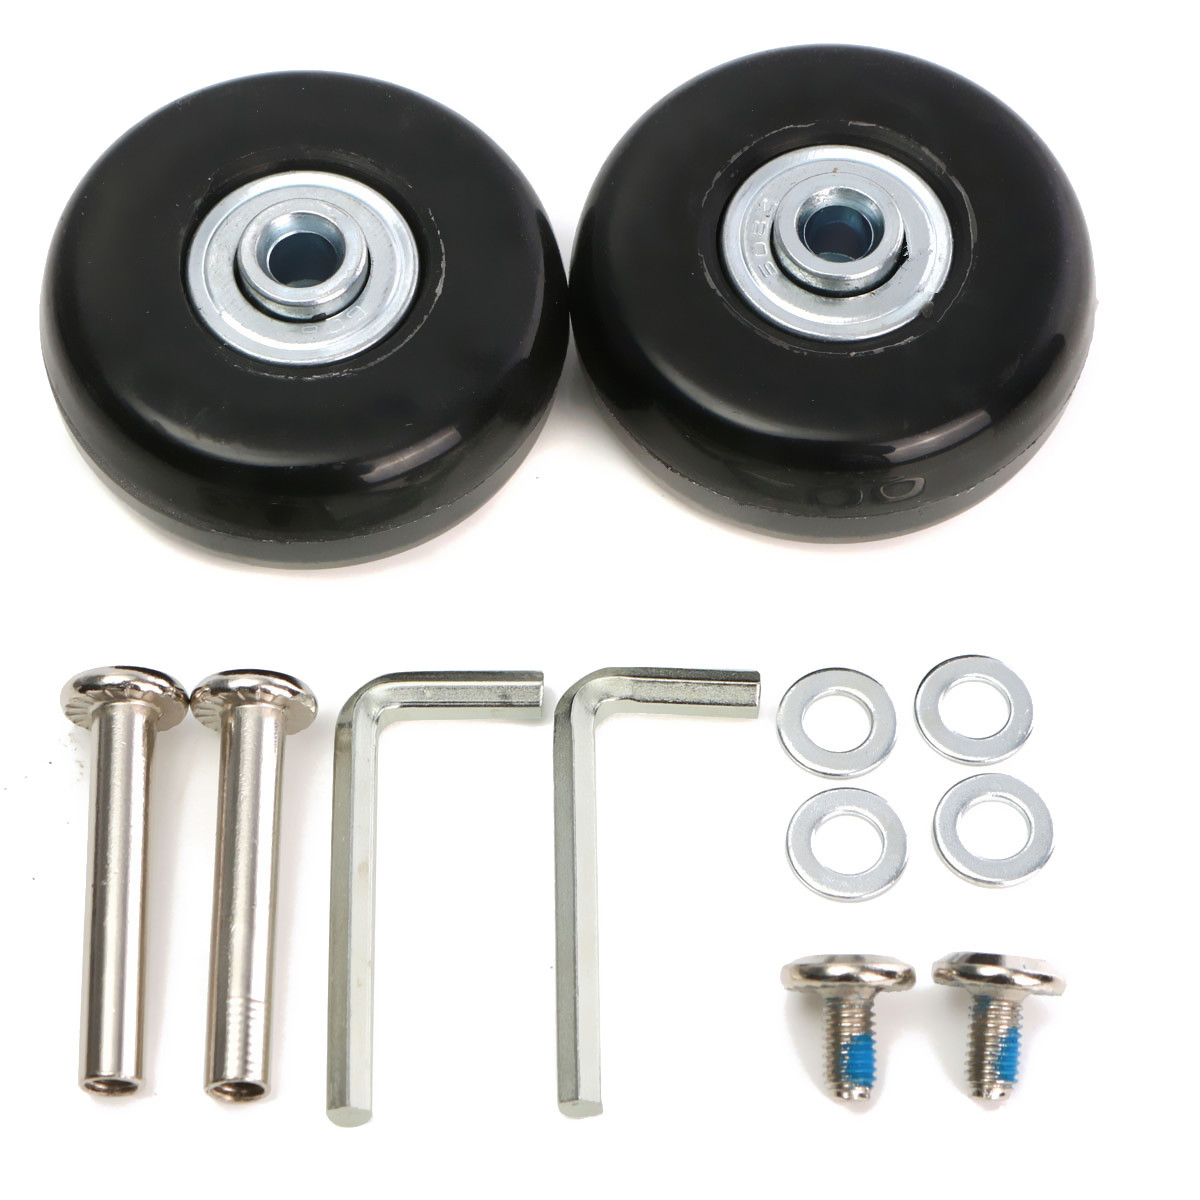 2pcs--Luggage-Suitcase-Replacement-Wheels-Axles-Deluxe-Repair-50times22mm-1041373-1